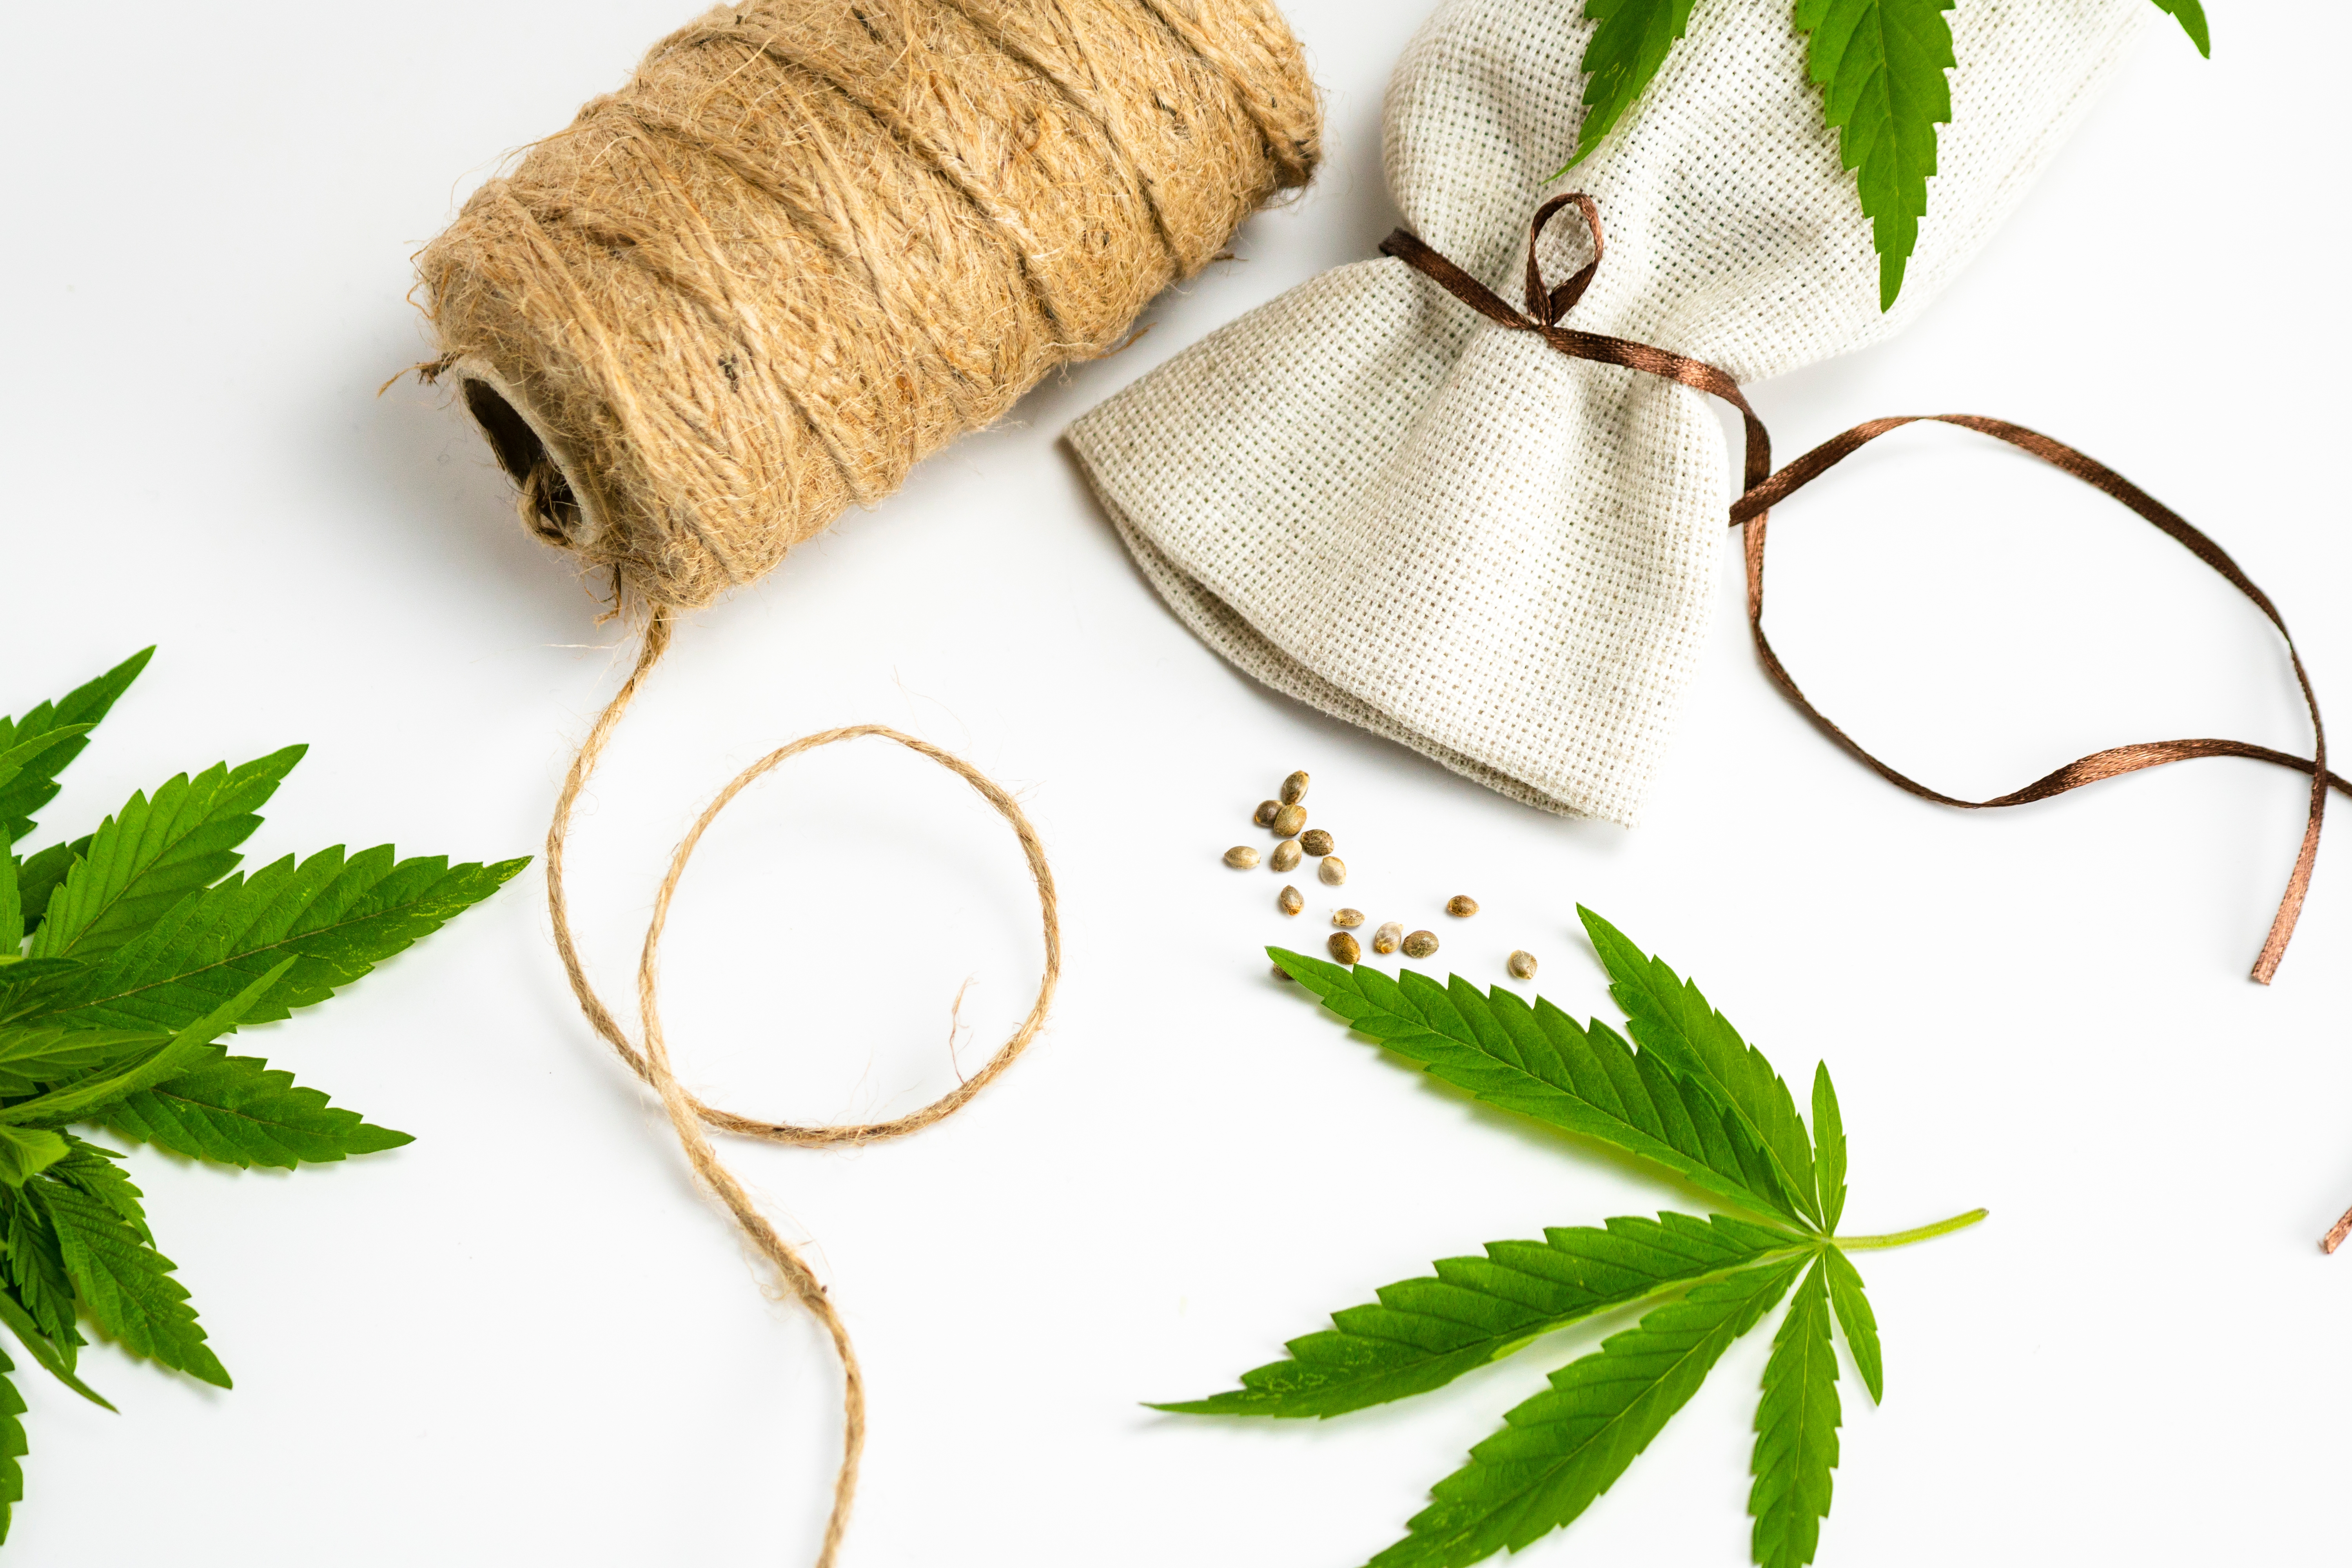 What is hemp used for? Textiles, rope, seed oil, and more!